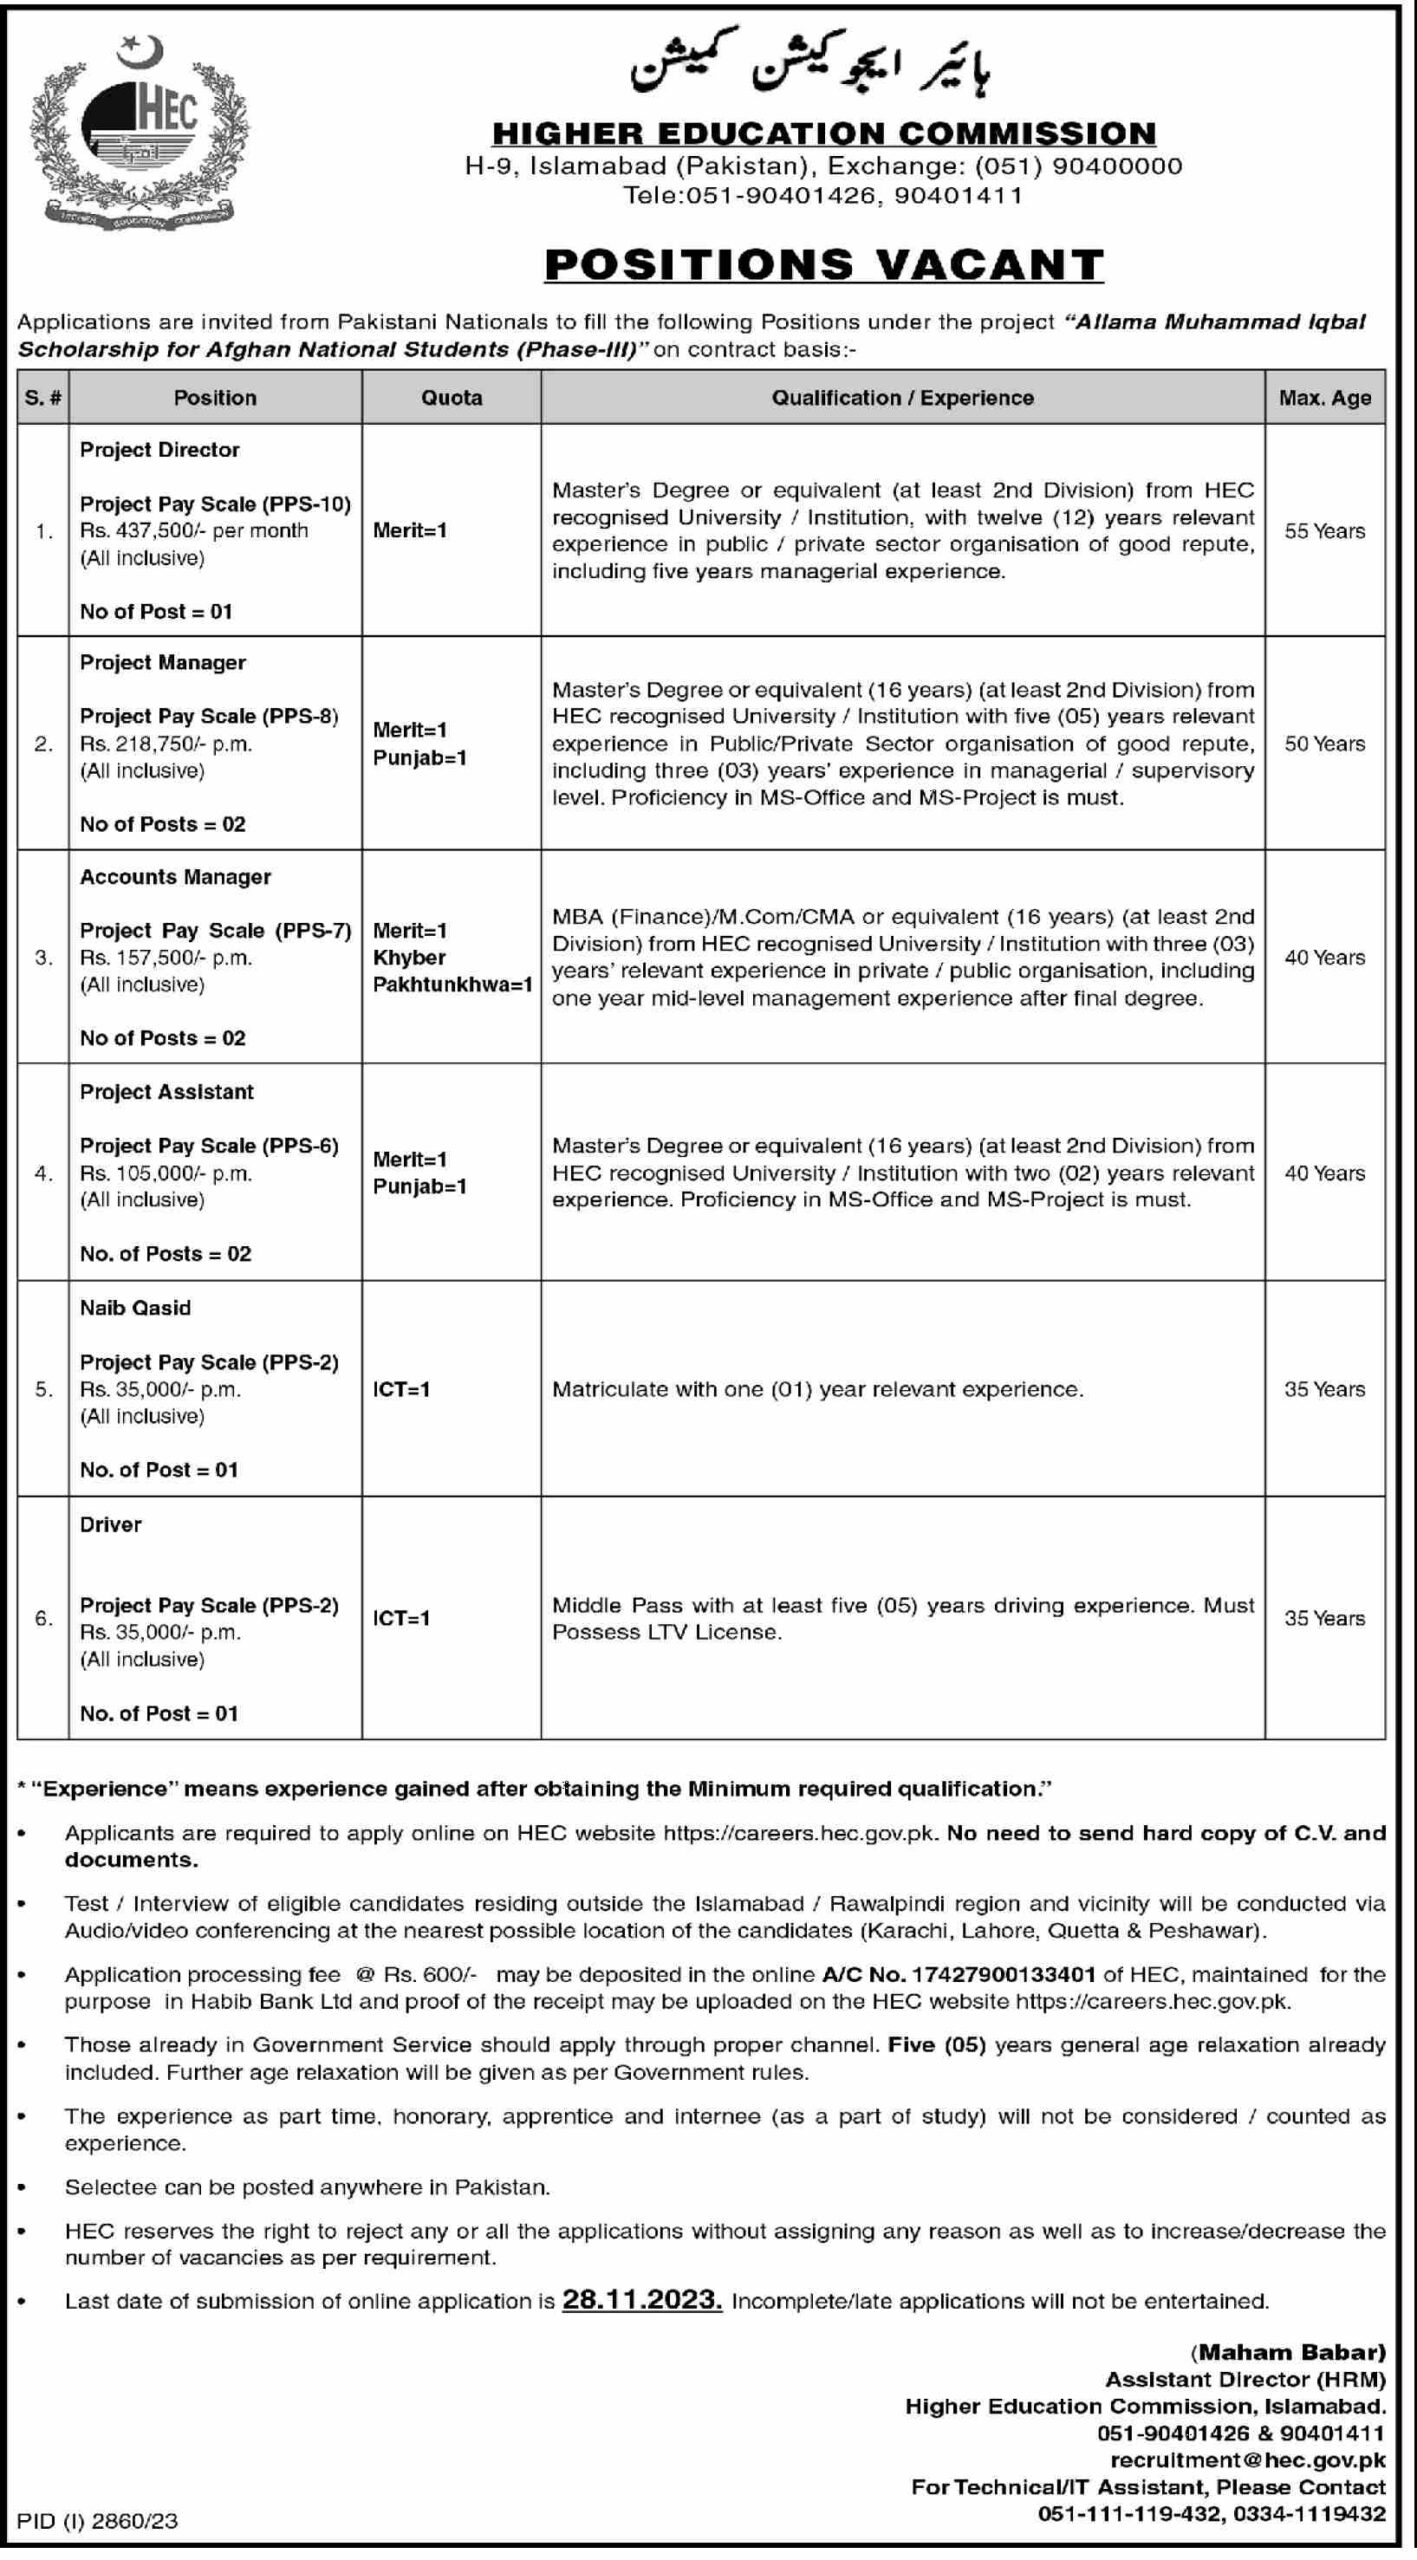 HEC Higher Education Commission Islamabad Jobs Project Manager Director Assistant Accounts